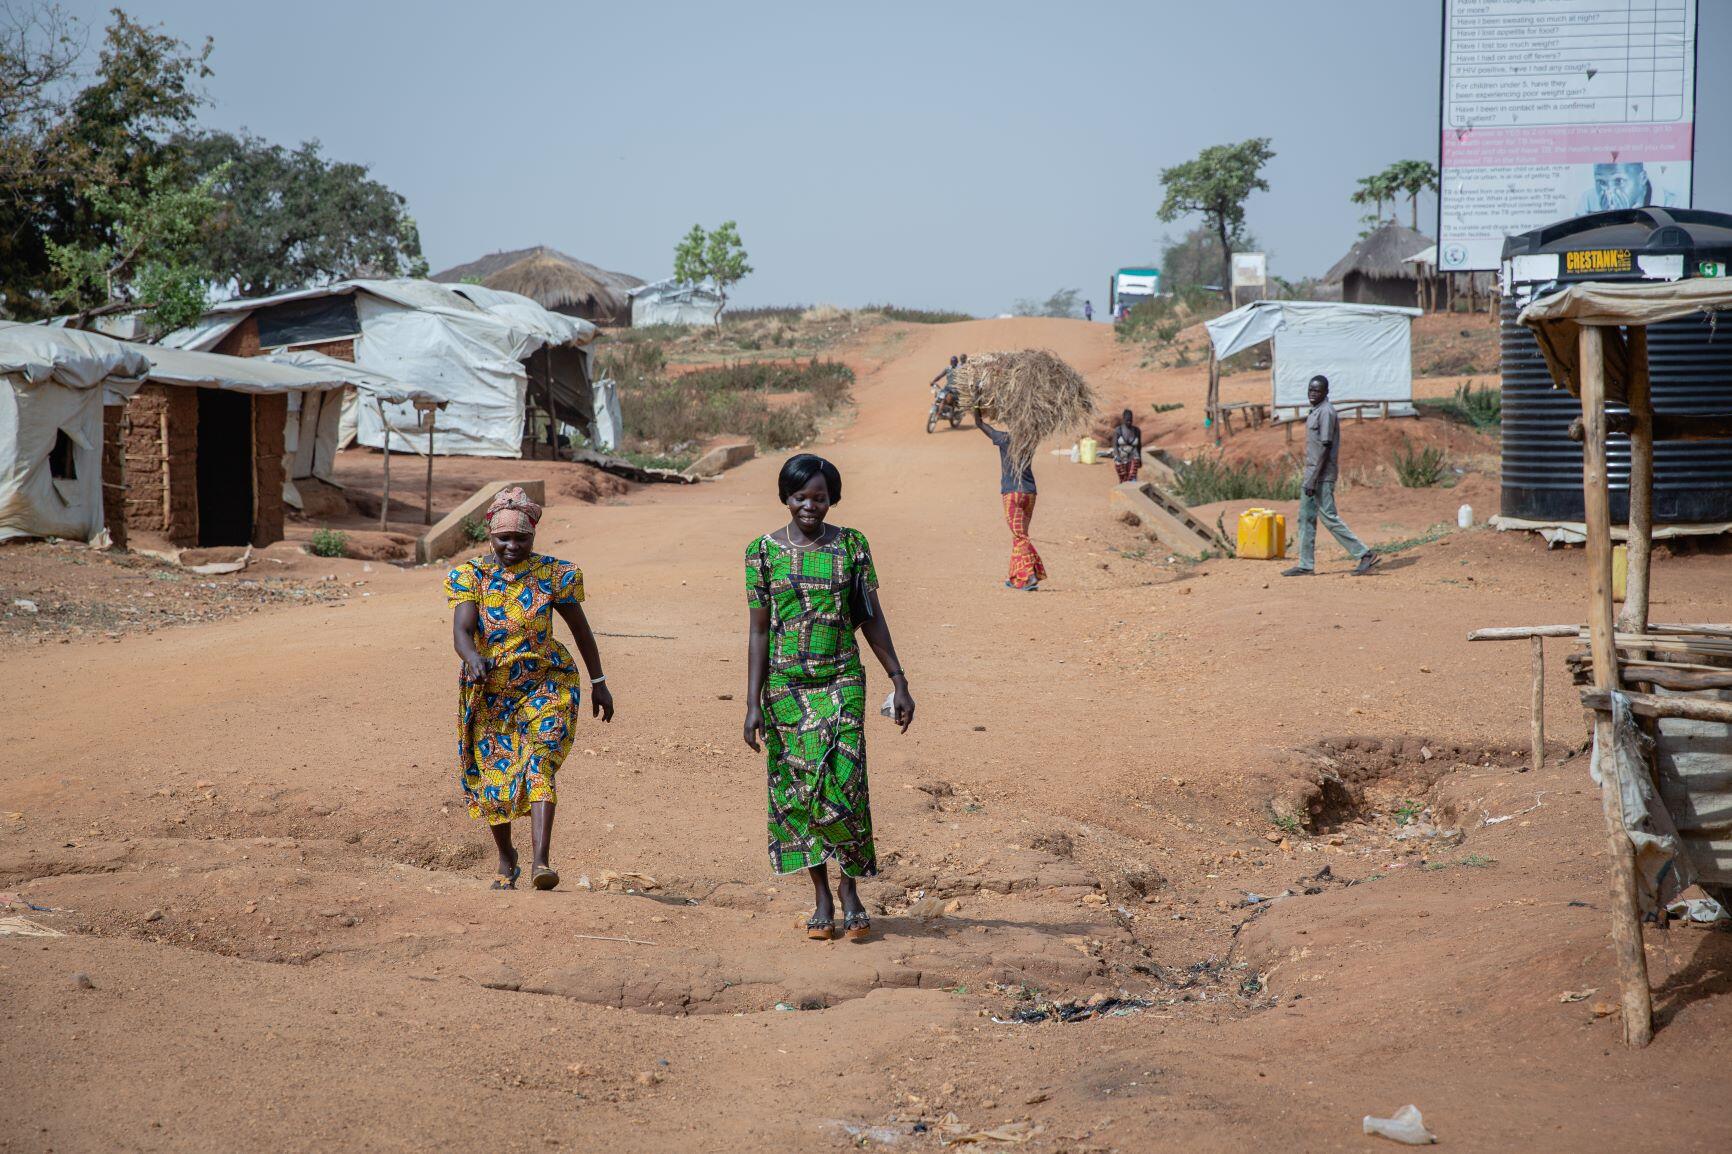 Women's rights activists Foni Grace and Loyce Tabu walk in Bidi Bidi refugeee settlement in Uganda.They are at the forefront of the photo and there are small makeshift homes and a man carrying a bale of hay behind them. 